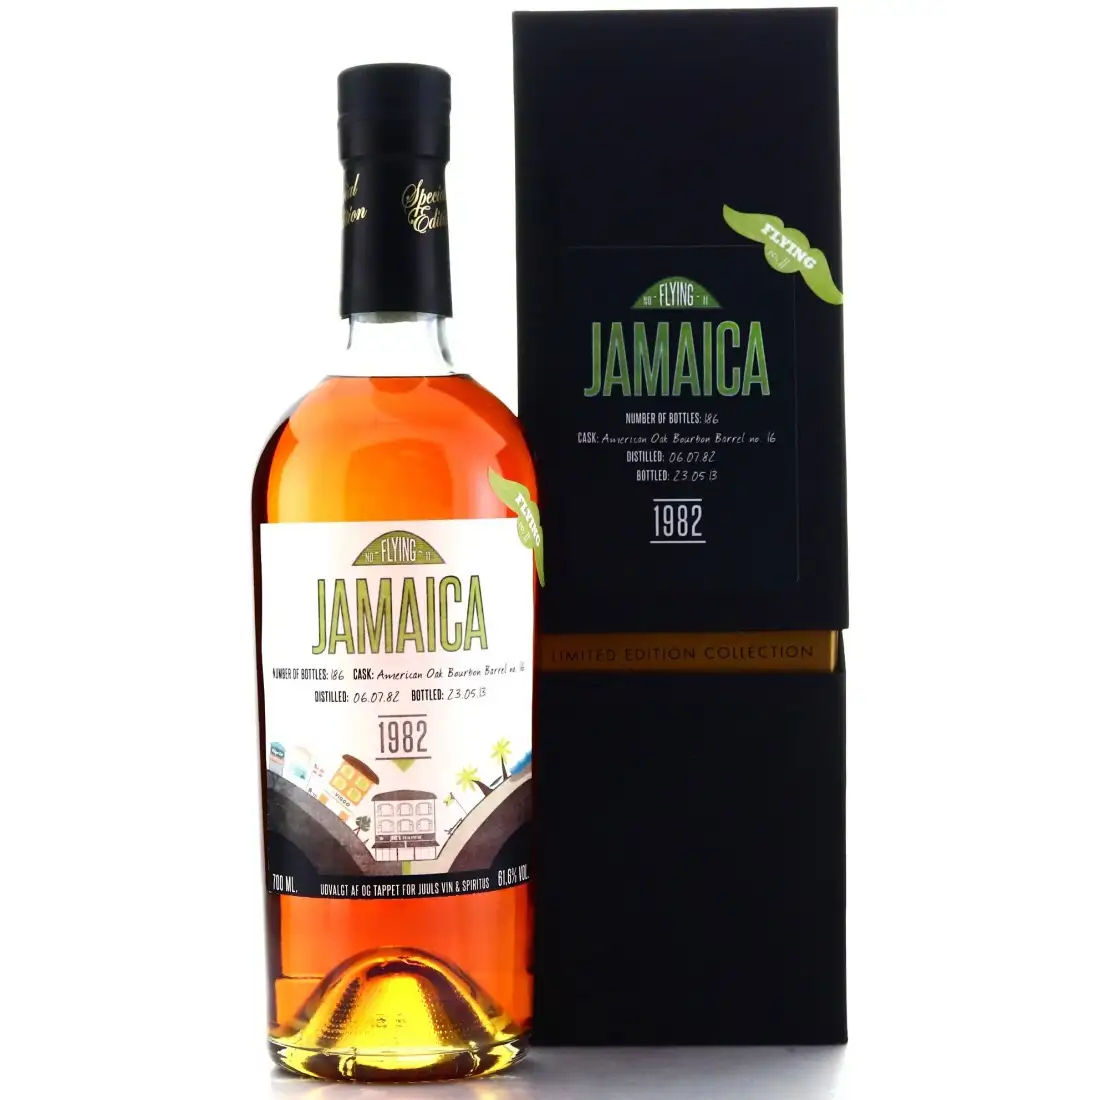 Image of the front of the bottle of the rum Jamaica Flying No. 11